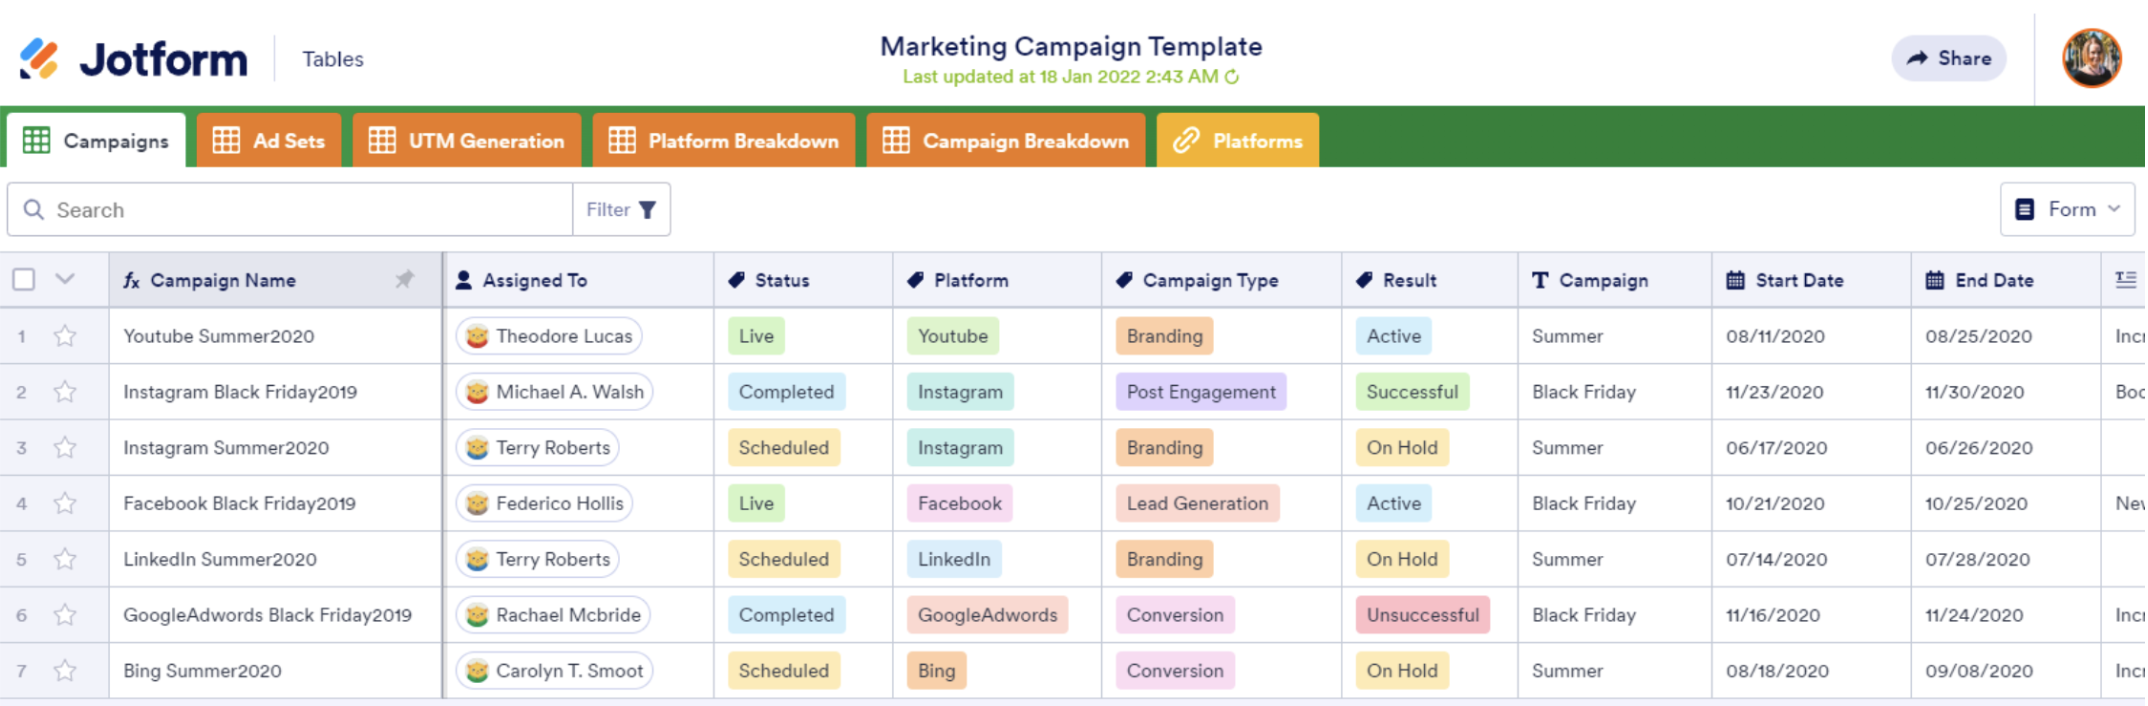 Image of Digital Marketing Campaign Template